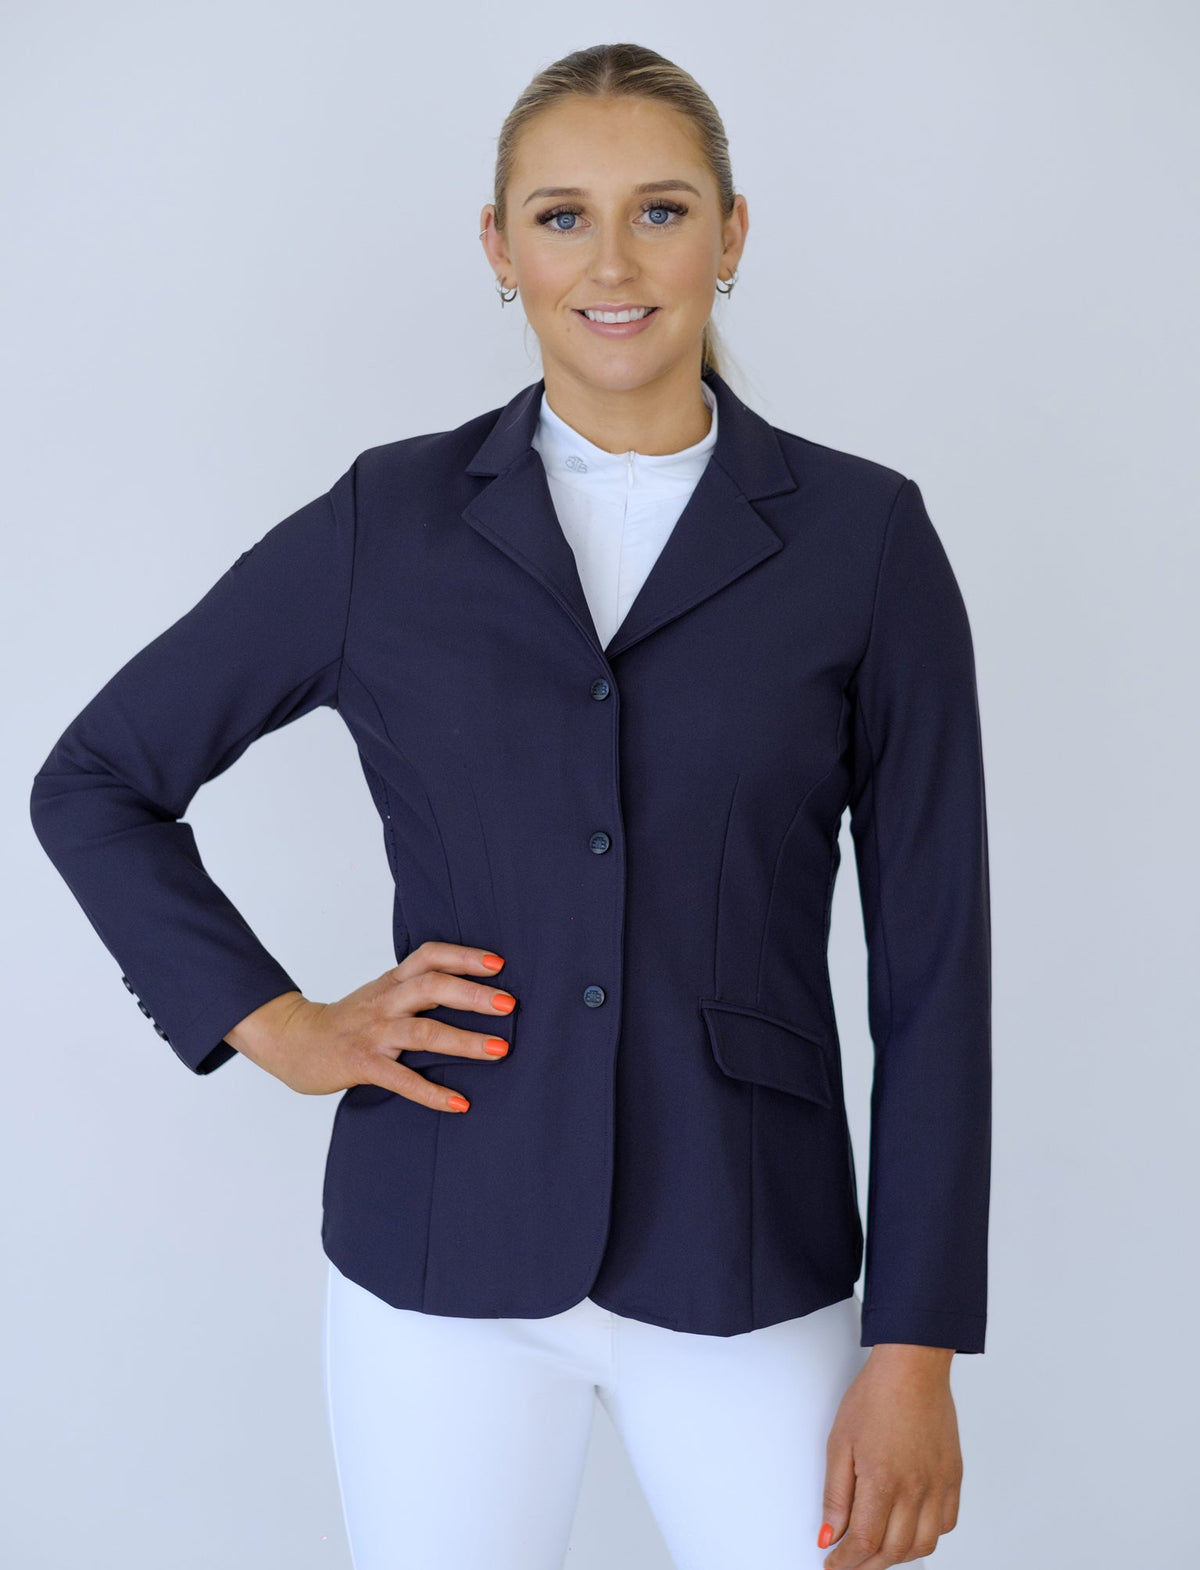 HOY PICK-UP NAVY PERFORMANCE COMPETITION JACKET